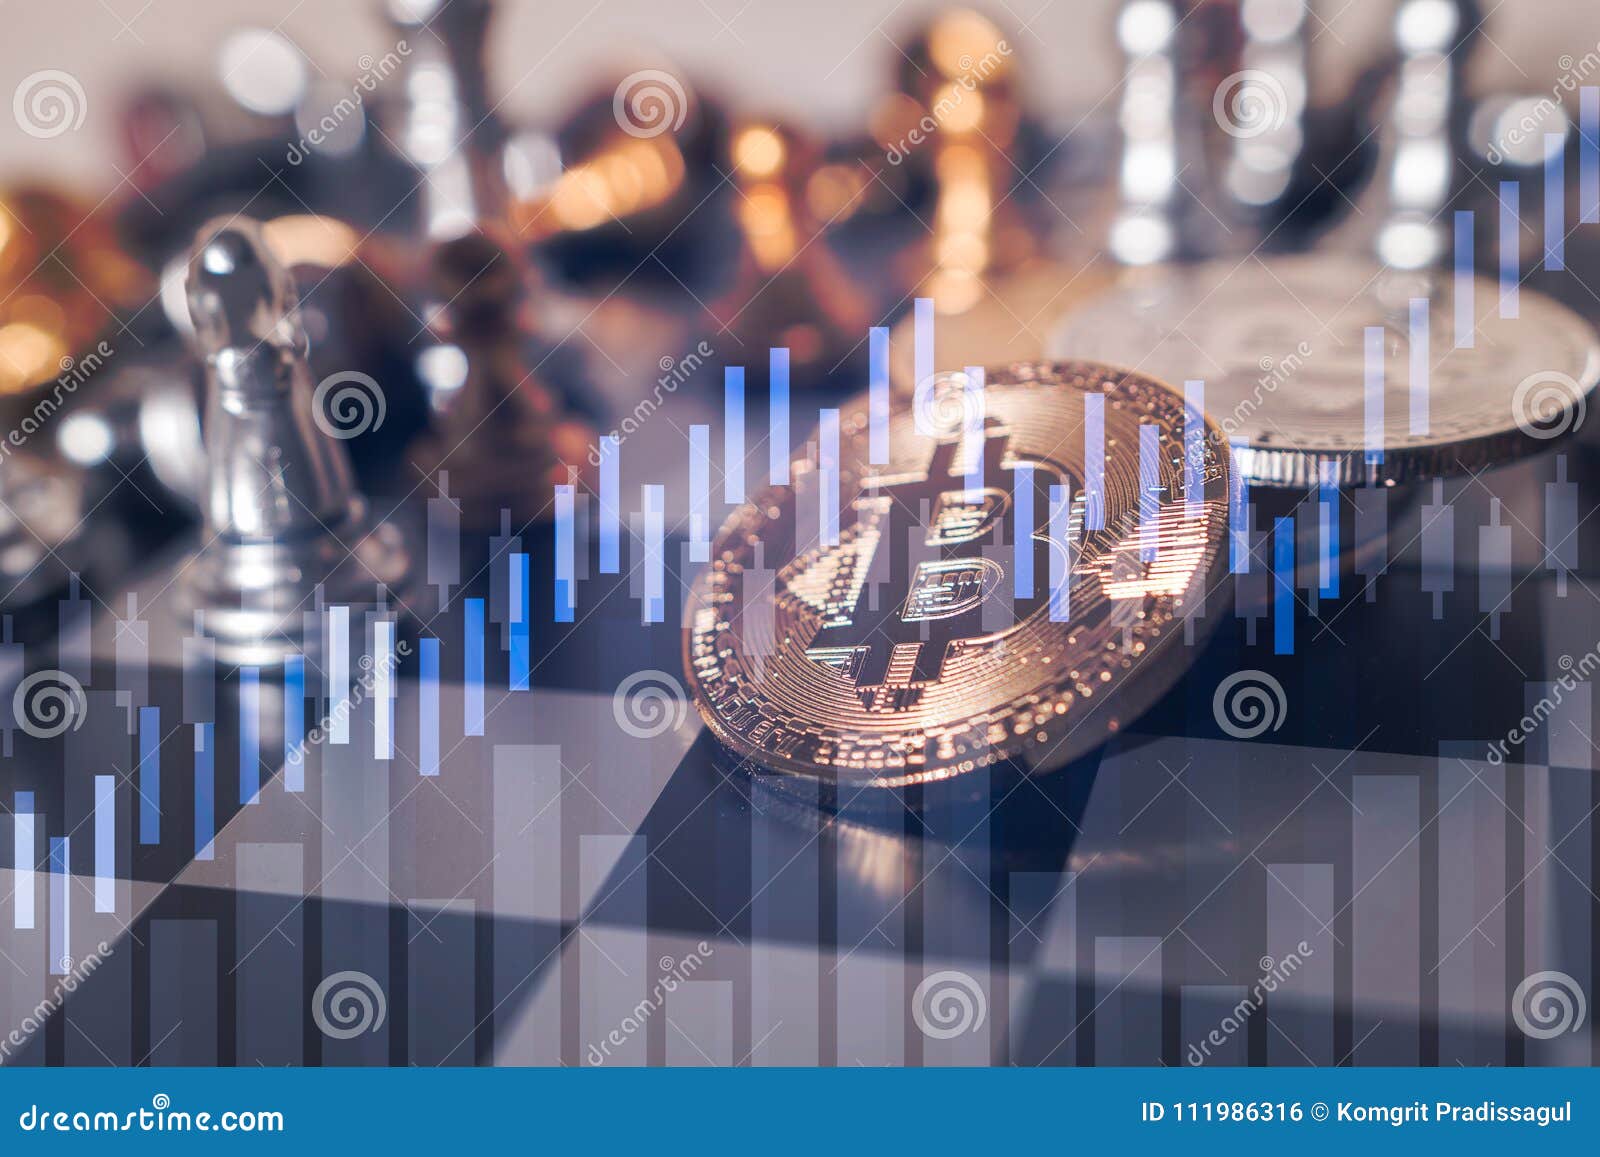 Bitcoin On Chess Board Game Of Business Ideas Stock Photo Image Of Challenge Game 111986316